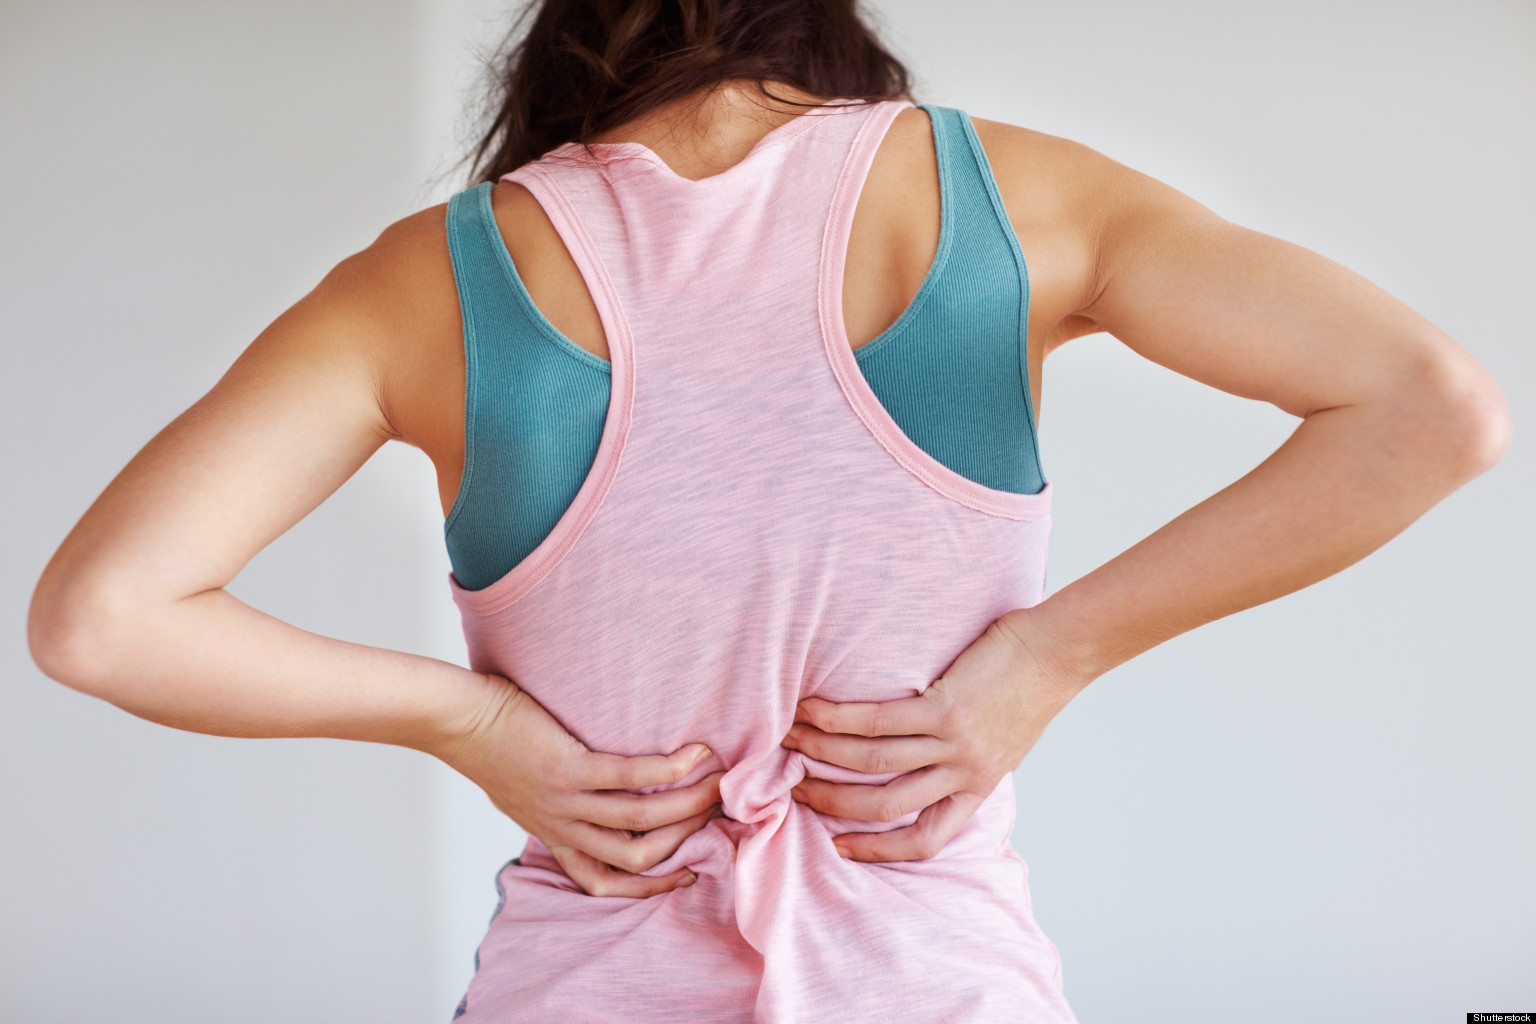 https://www.kineticedgept.com/wp-content/uploads/2015/12/You-Can-Conquer-Your-Back-Pain-With-These-Tips.jpg